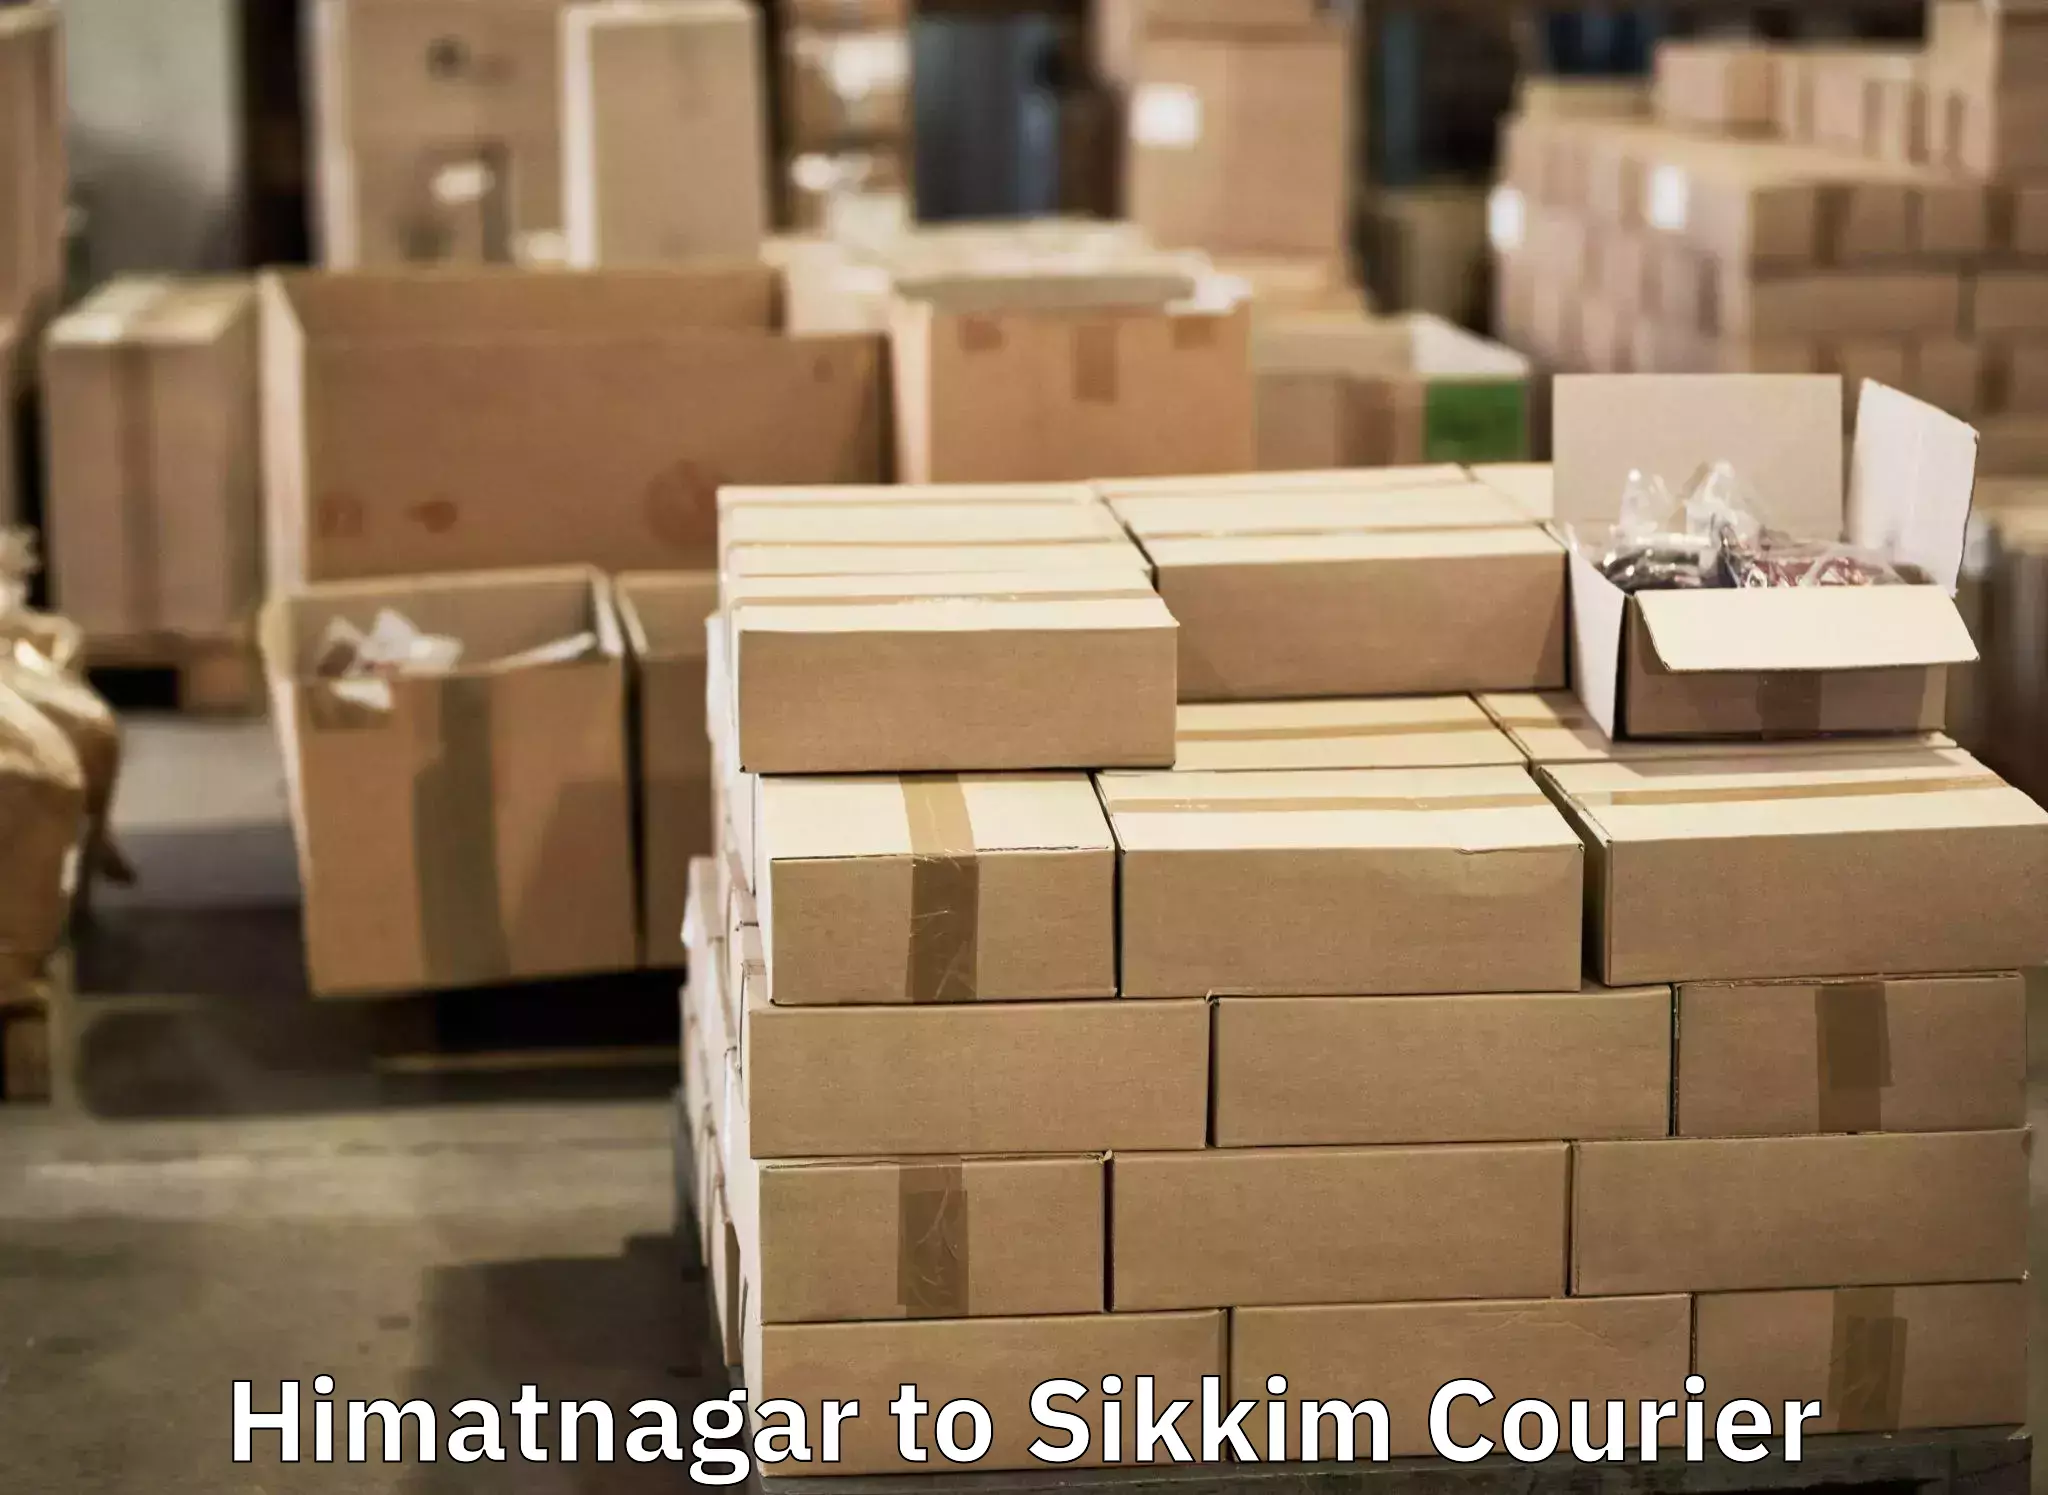 Luggage delivery providers Himatnagar to Sikkim